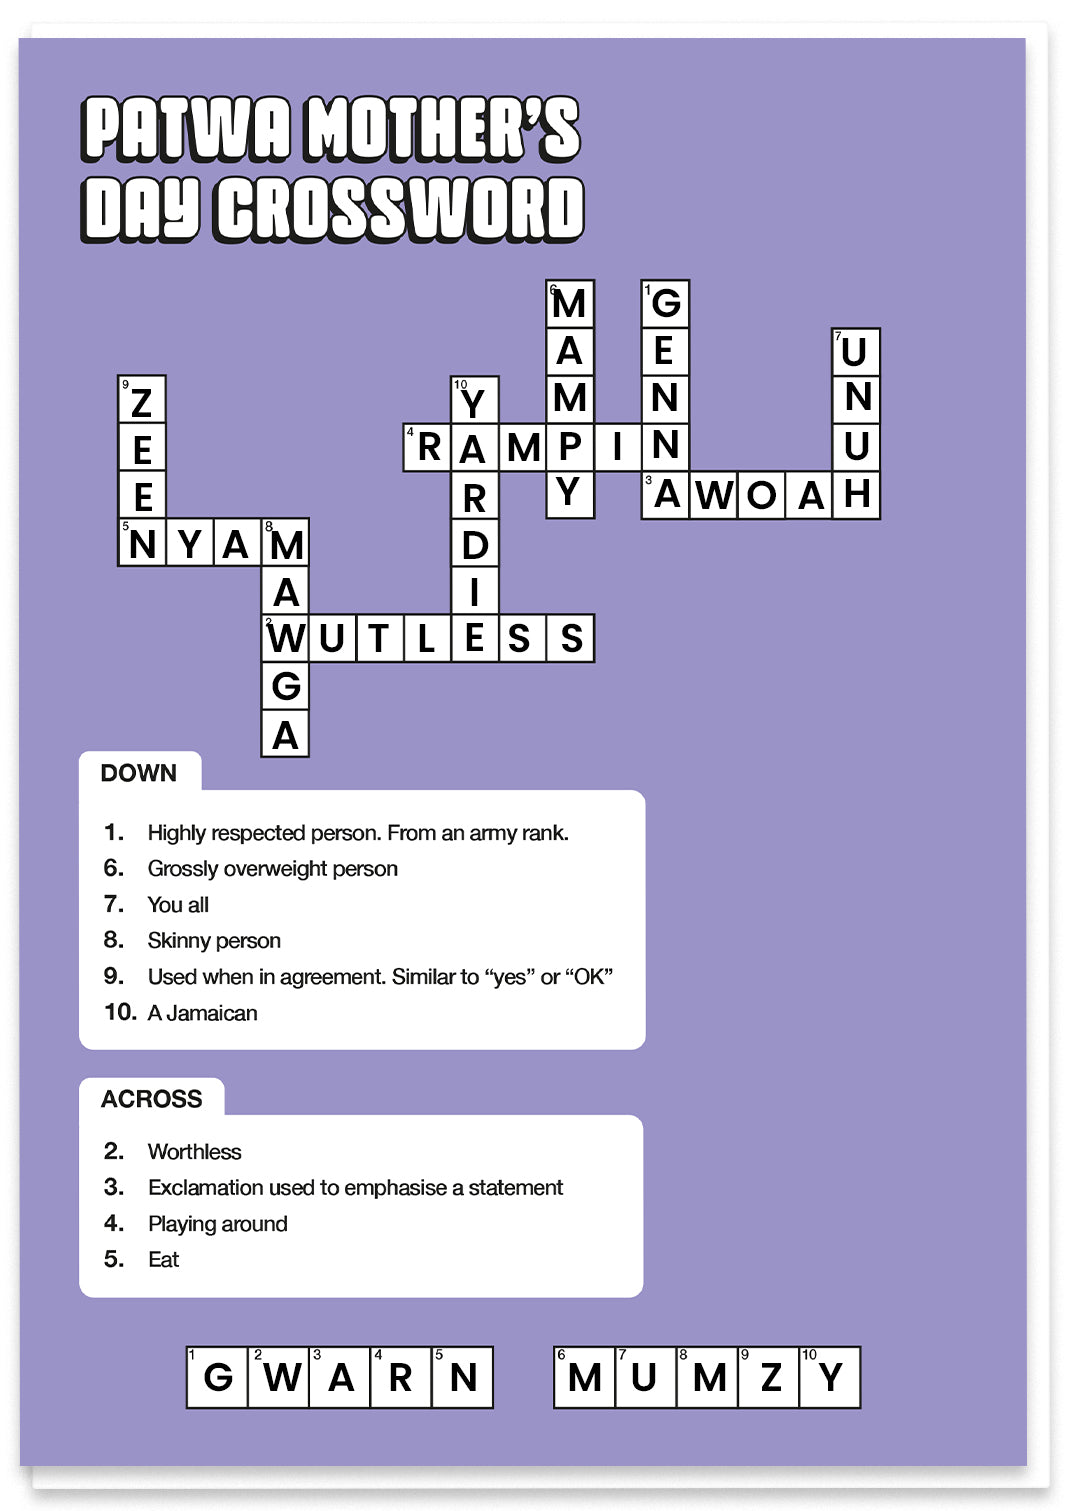 Patwa Mother's Day Crossword